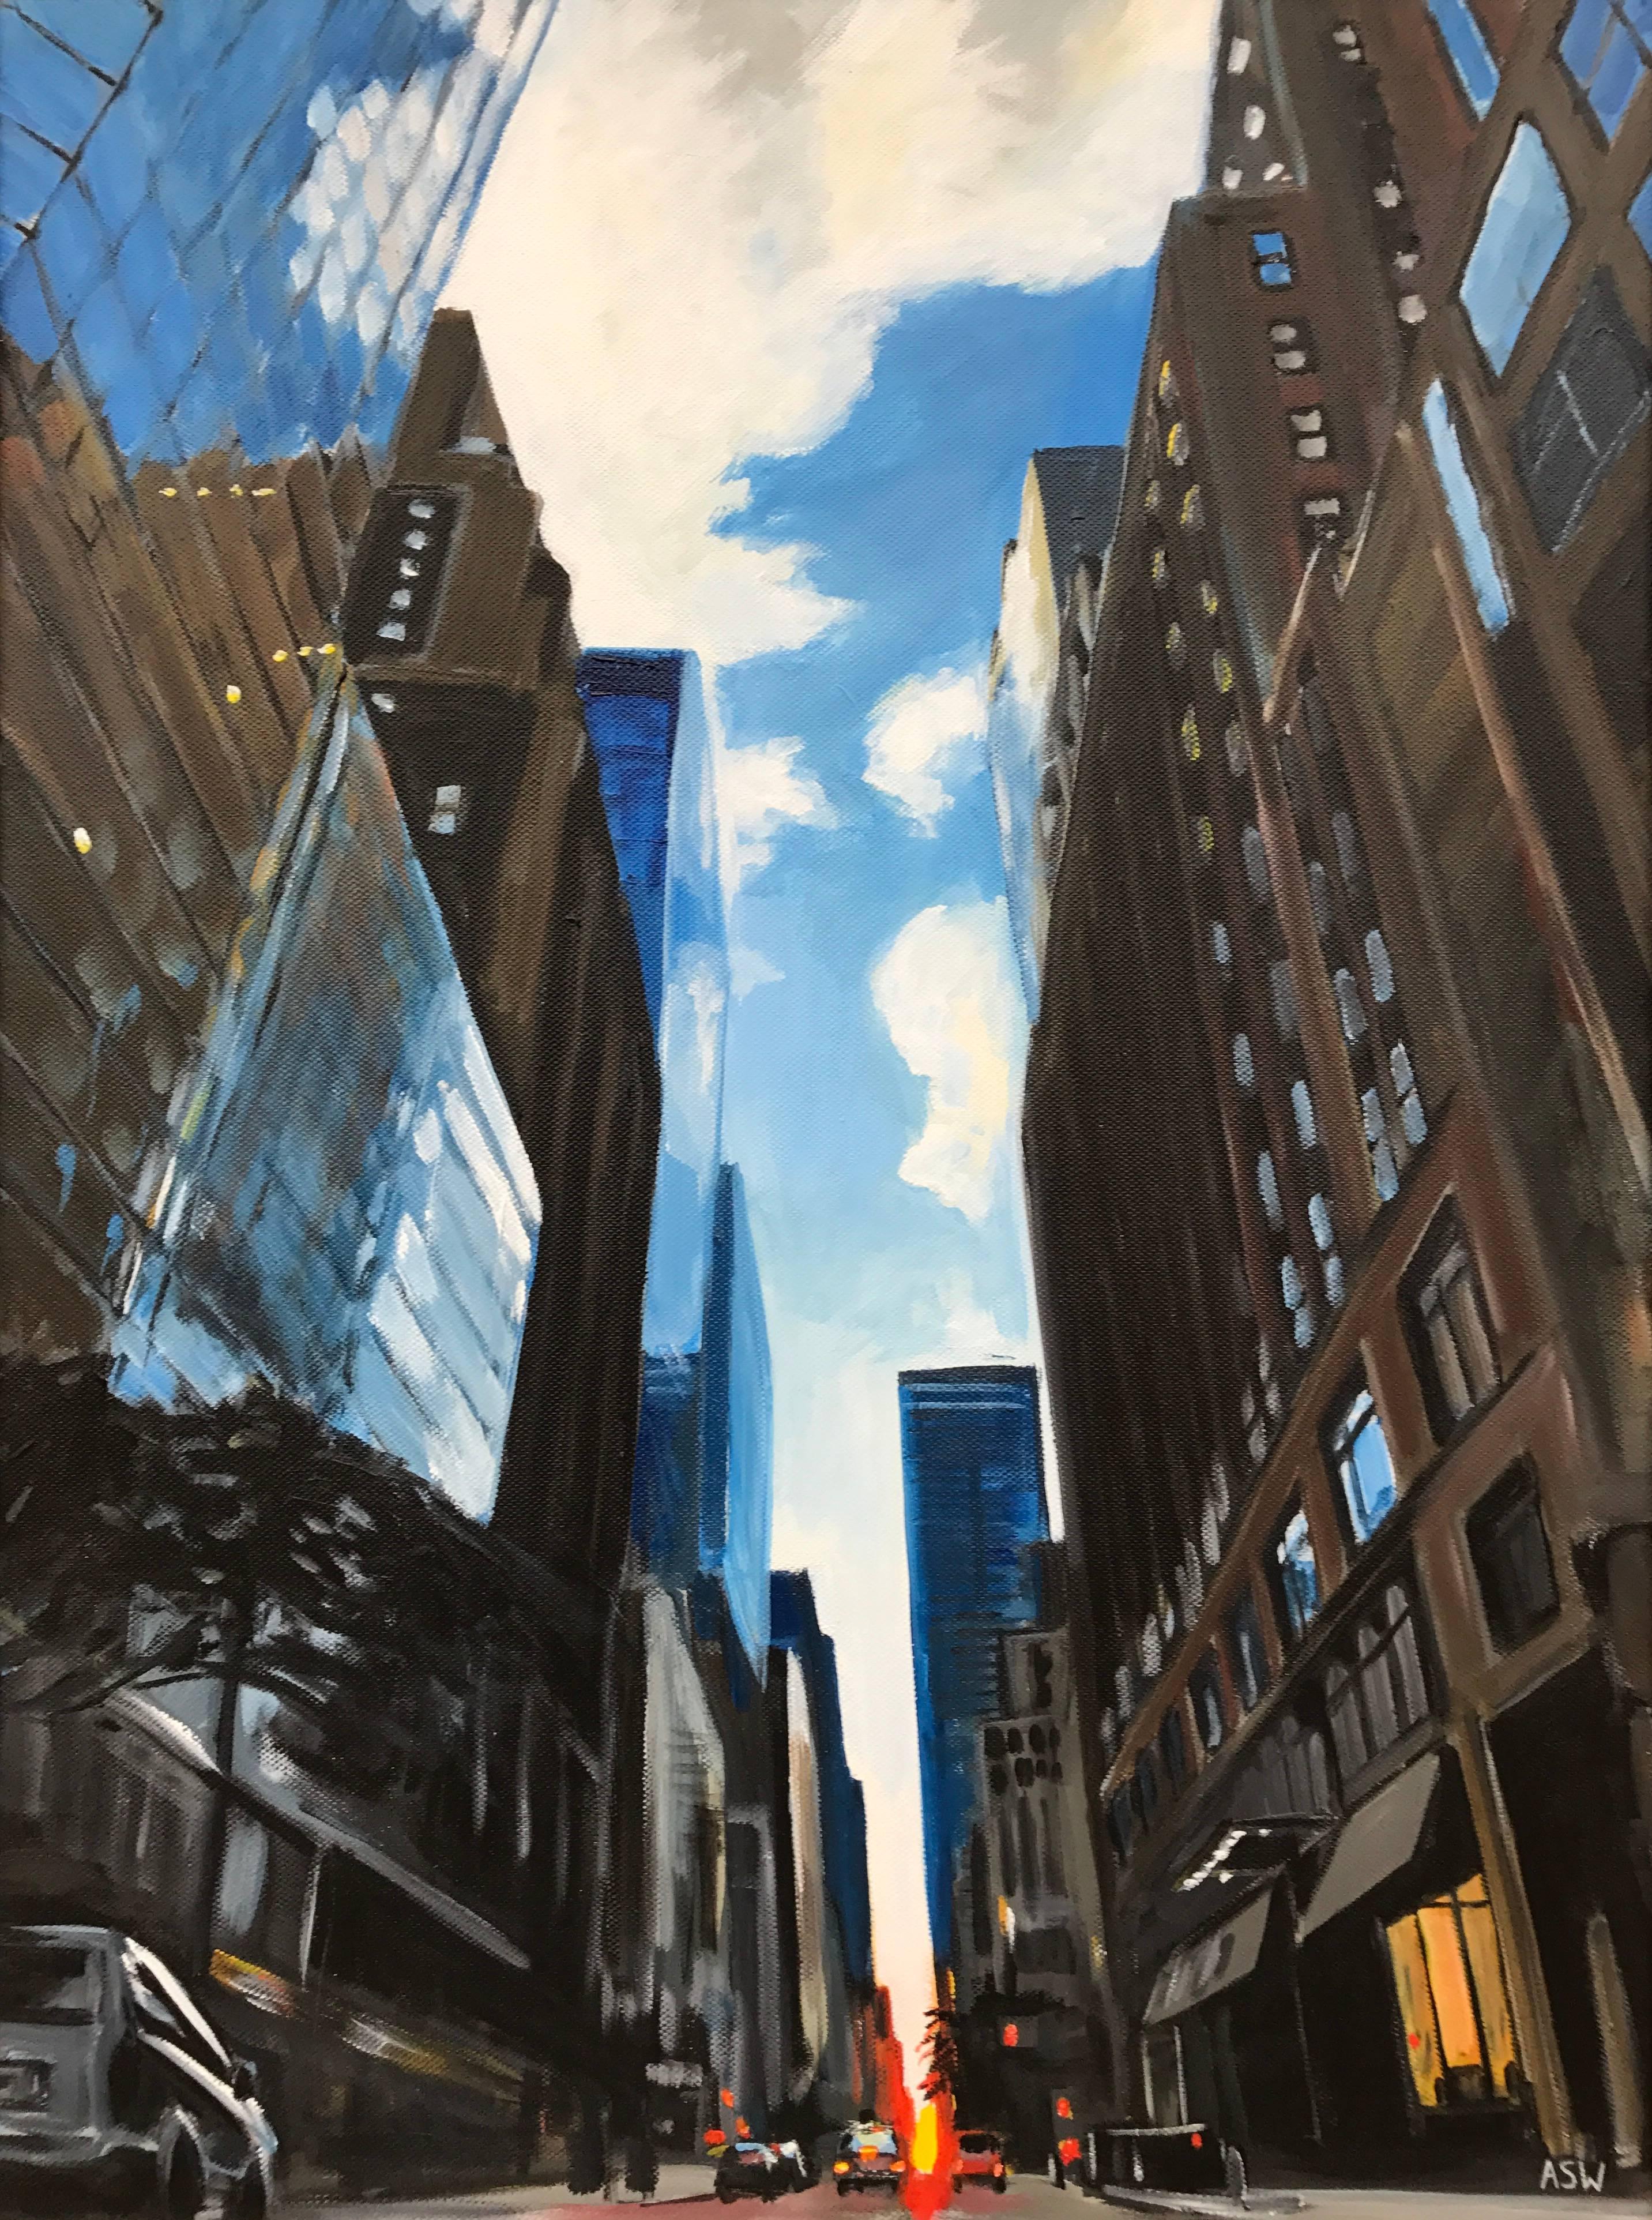 Painting of Summer Sunset in New York City by Leading British Urban Artist UK. This unique original illustrates the magnitude of the architecture of New York by virtue of a unique perspective from street level. Angela Wakefield has twice been on the